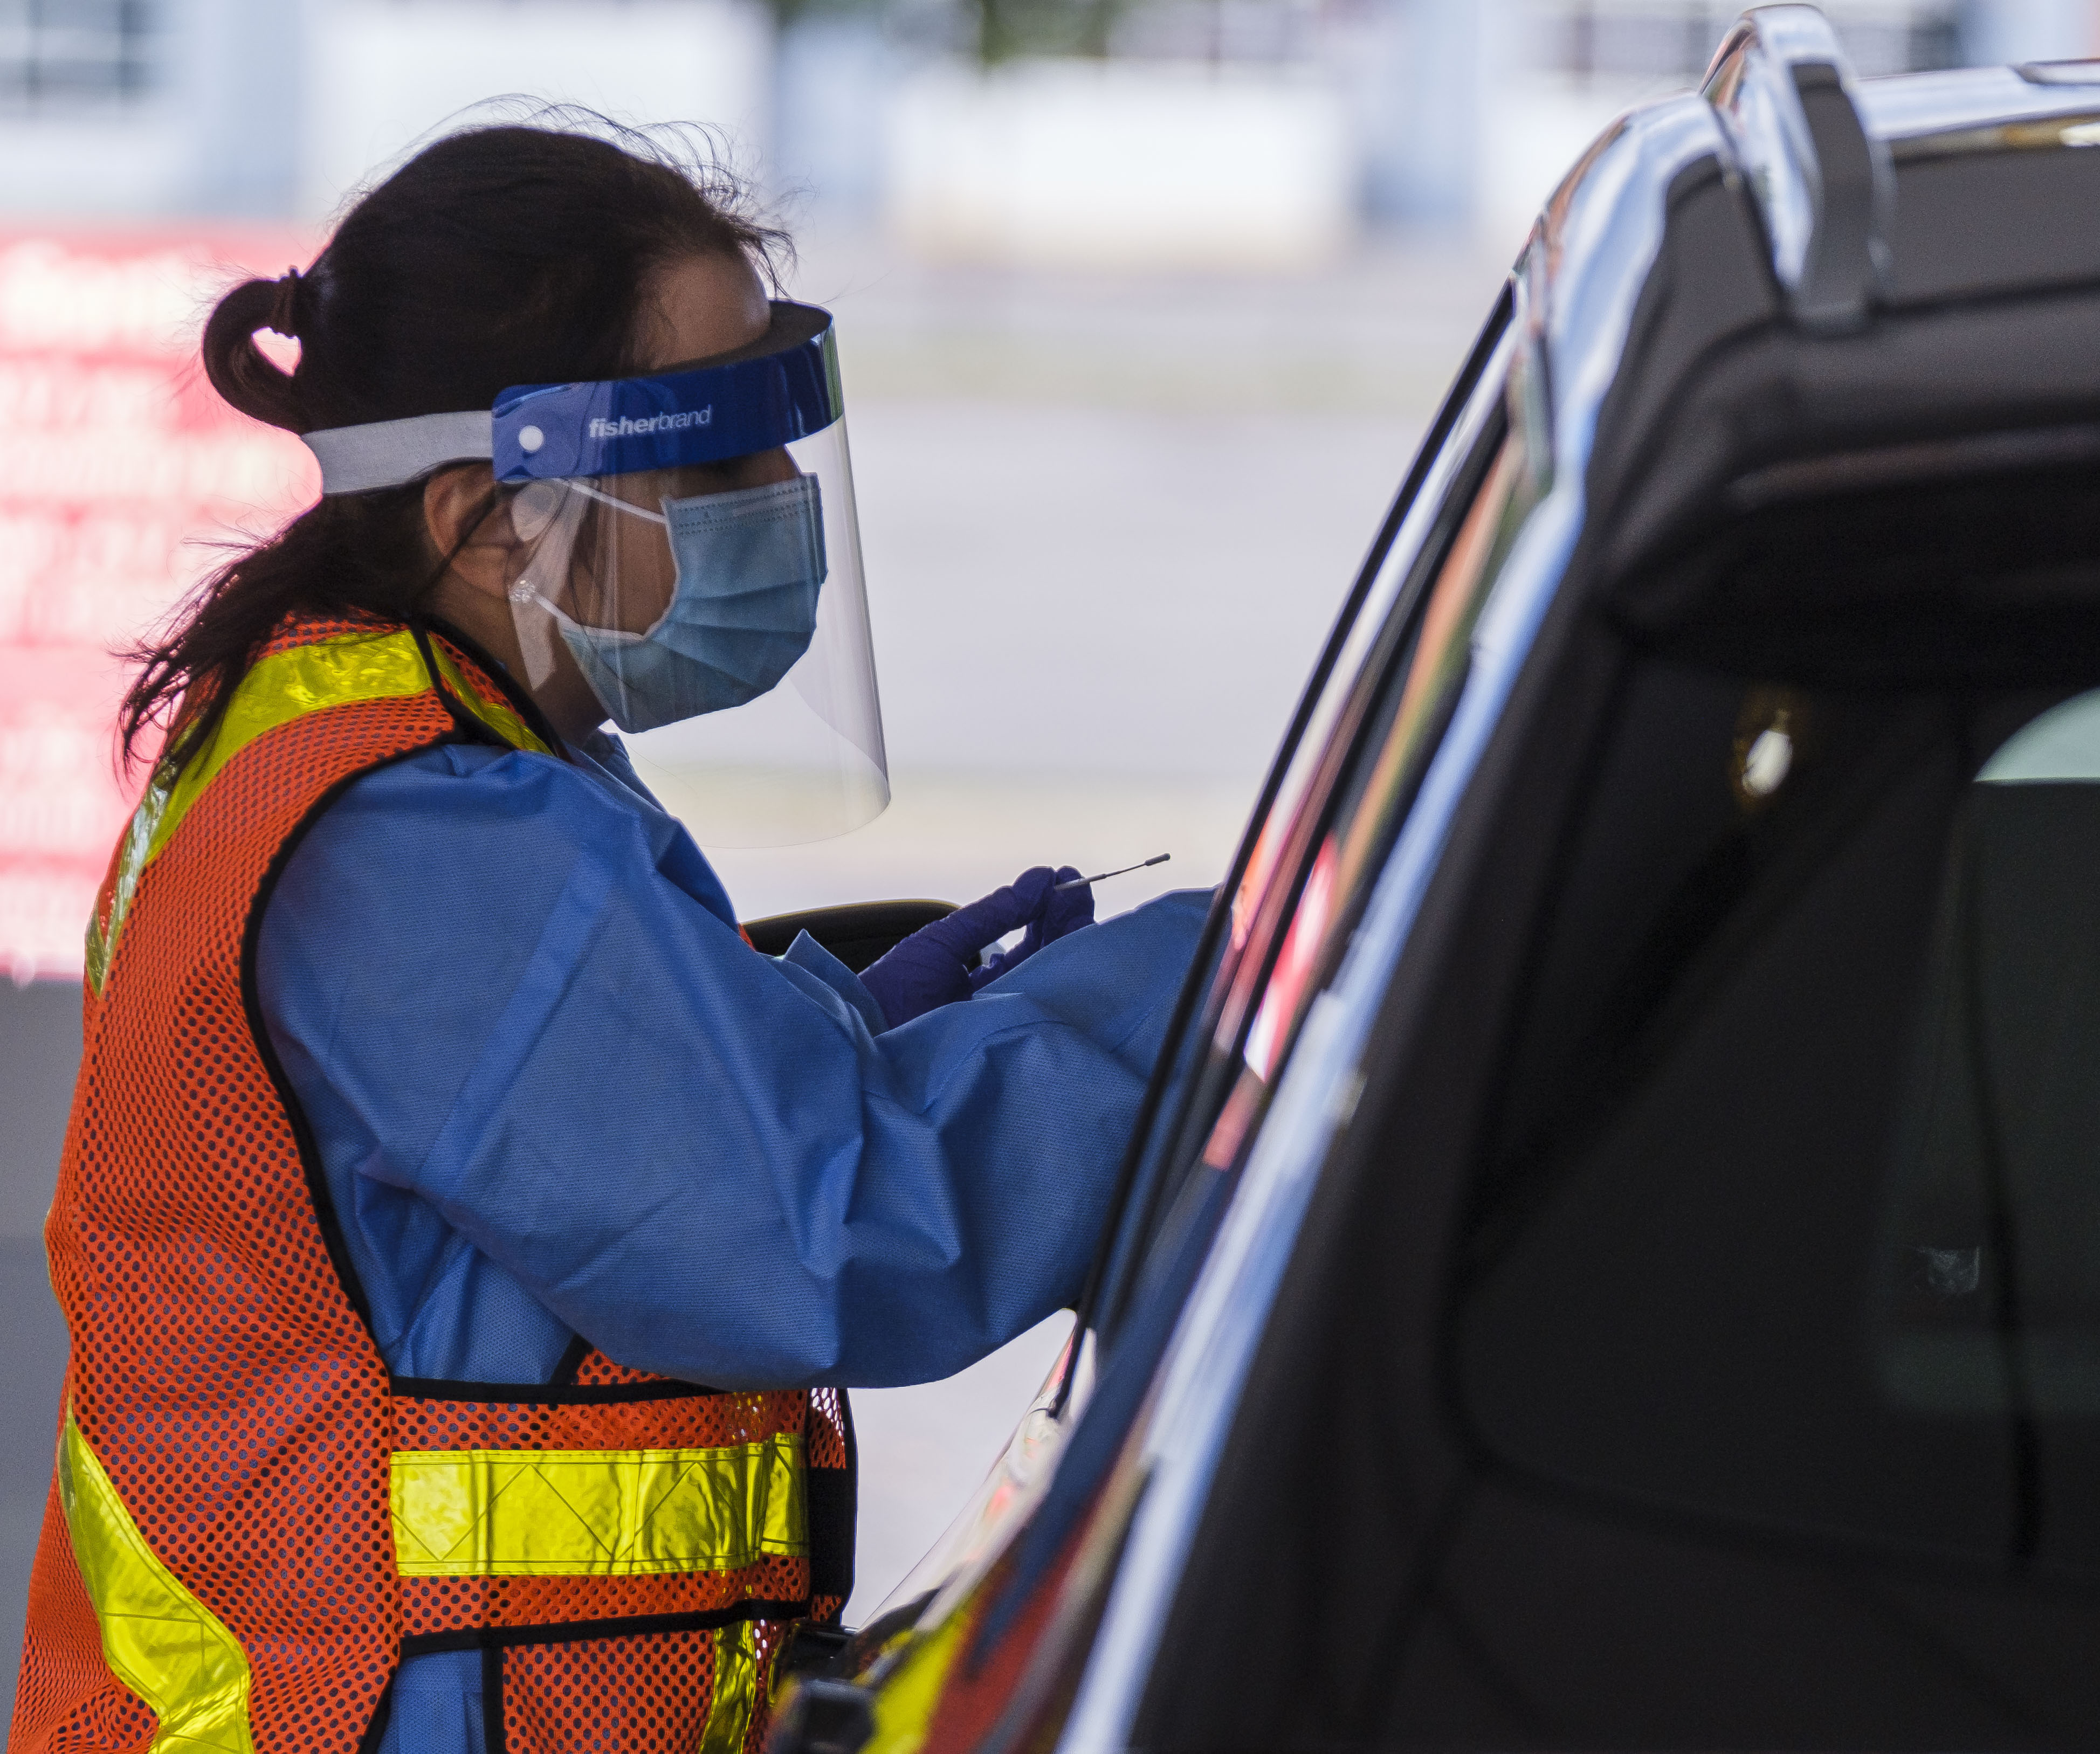 A COVID tester holds a swab after testing someone in their car.